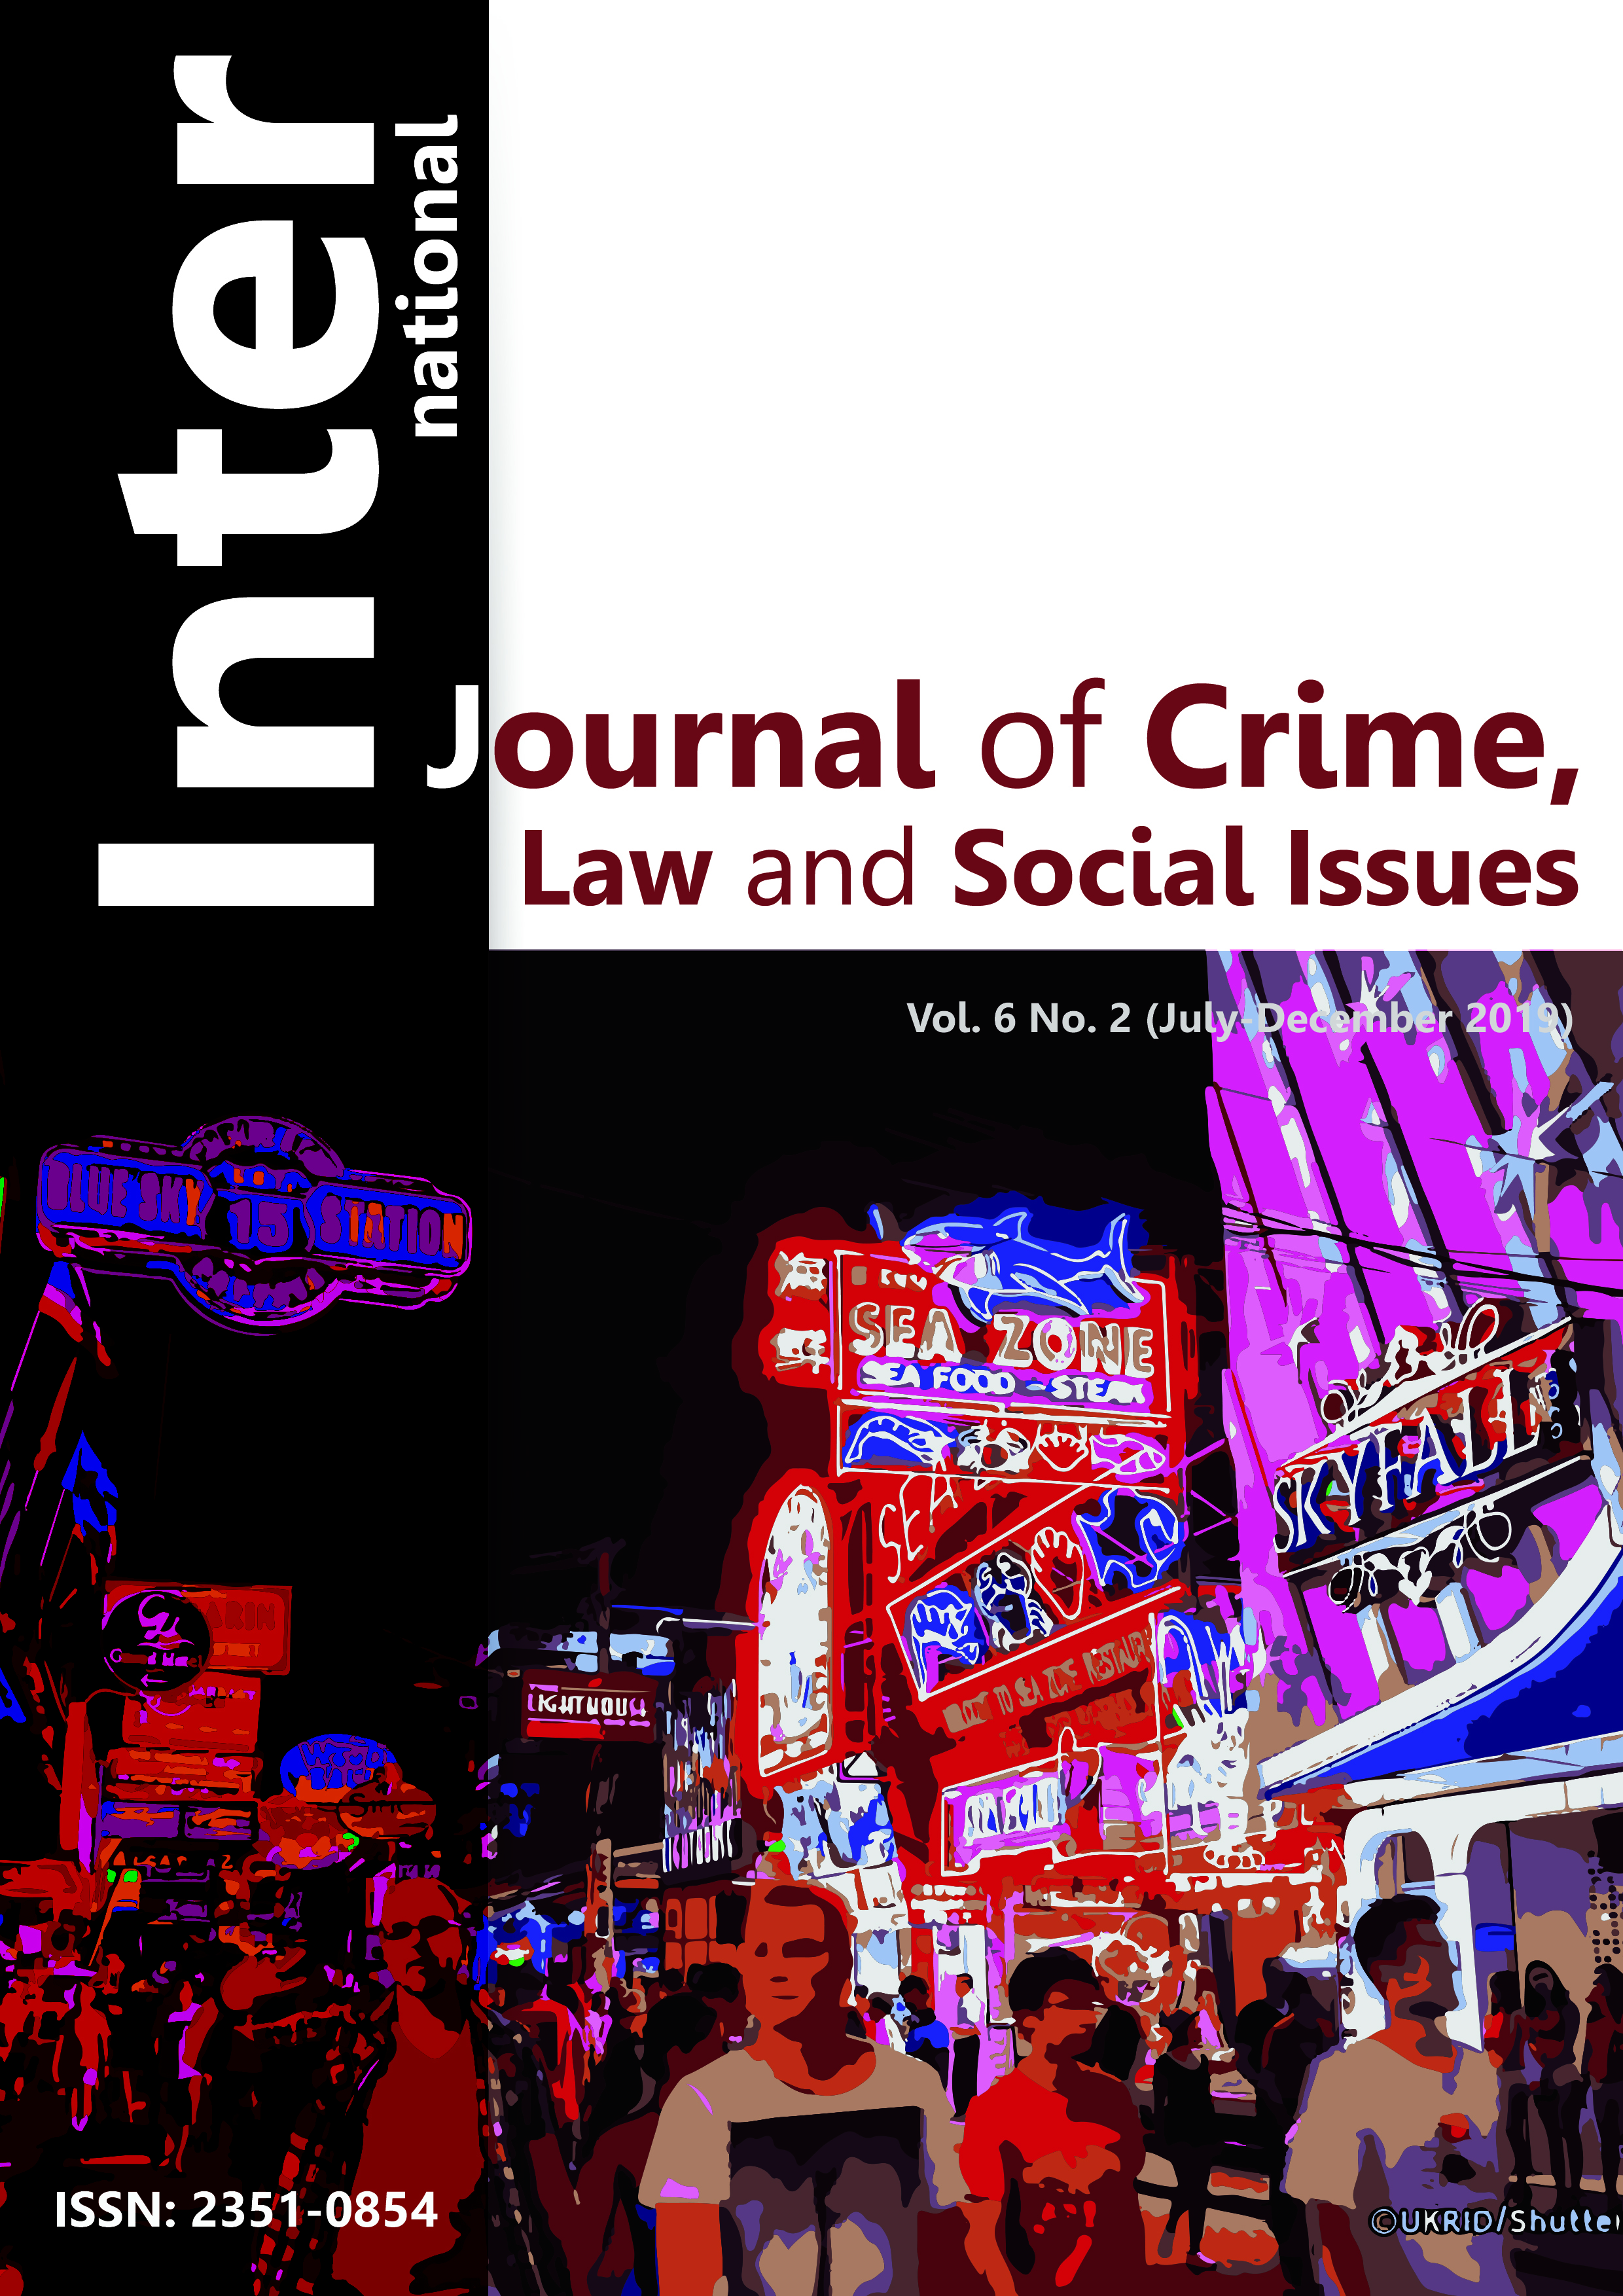 					View Vol. 6 No. 2 (2019): International Journal of Crime, Law and Social Issues, Vol. 6, No. 2, 2019
				